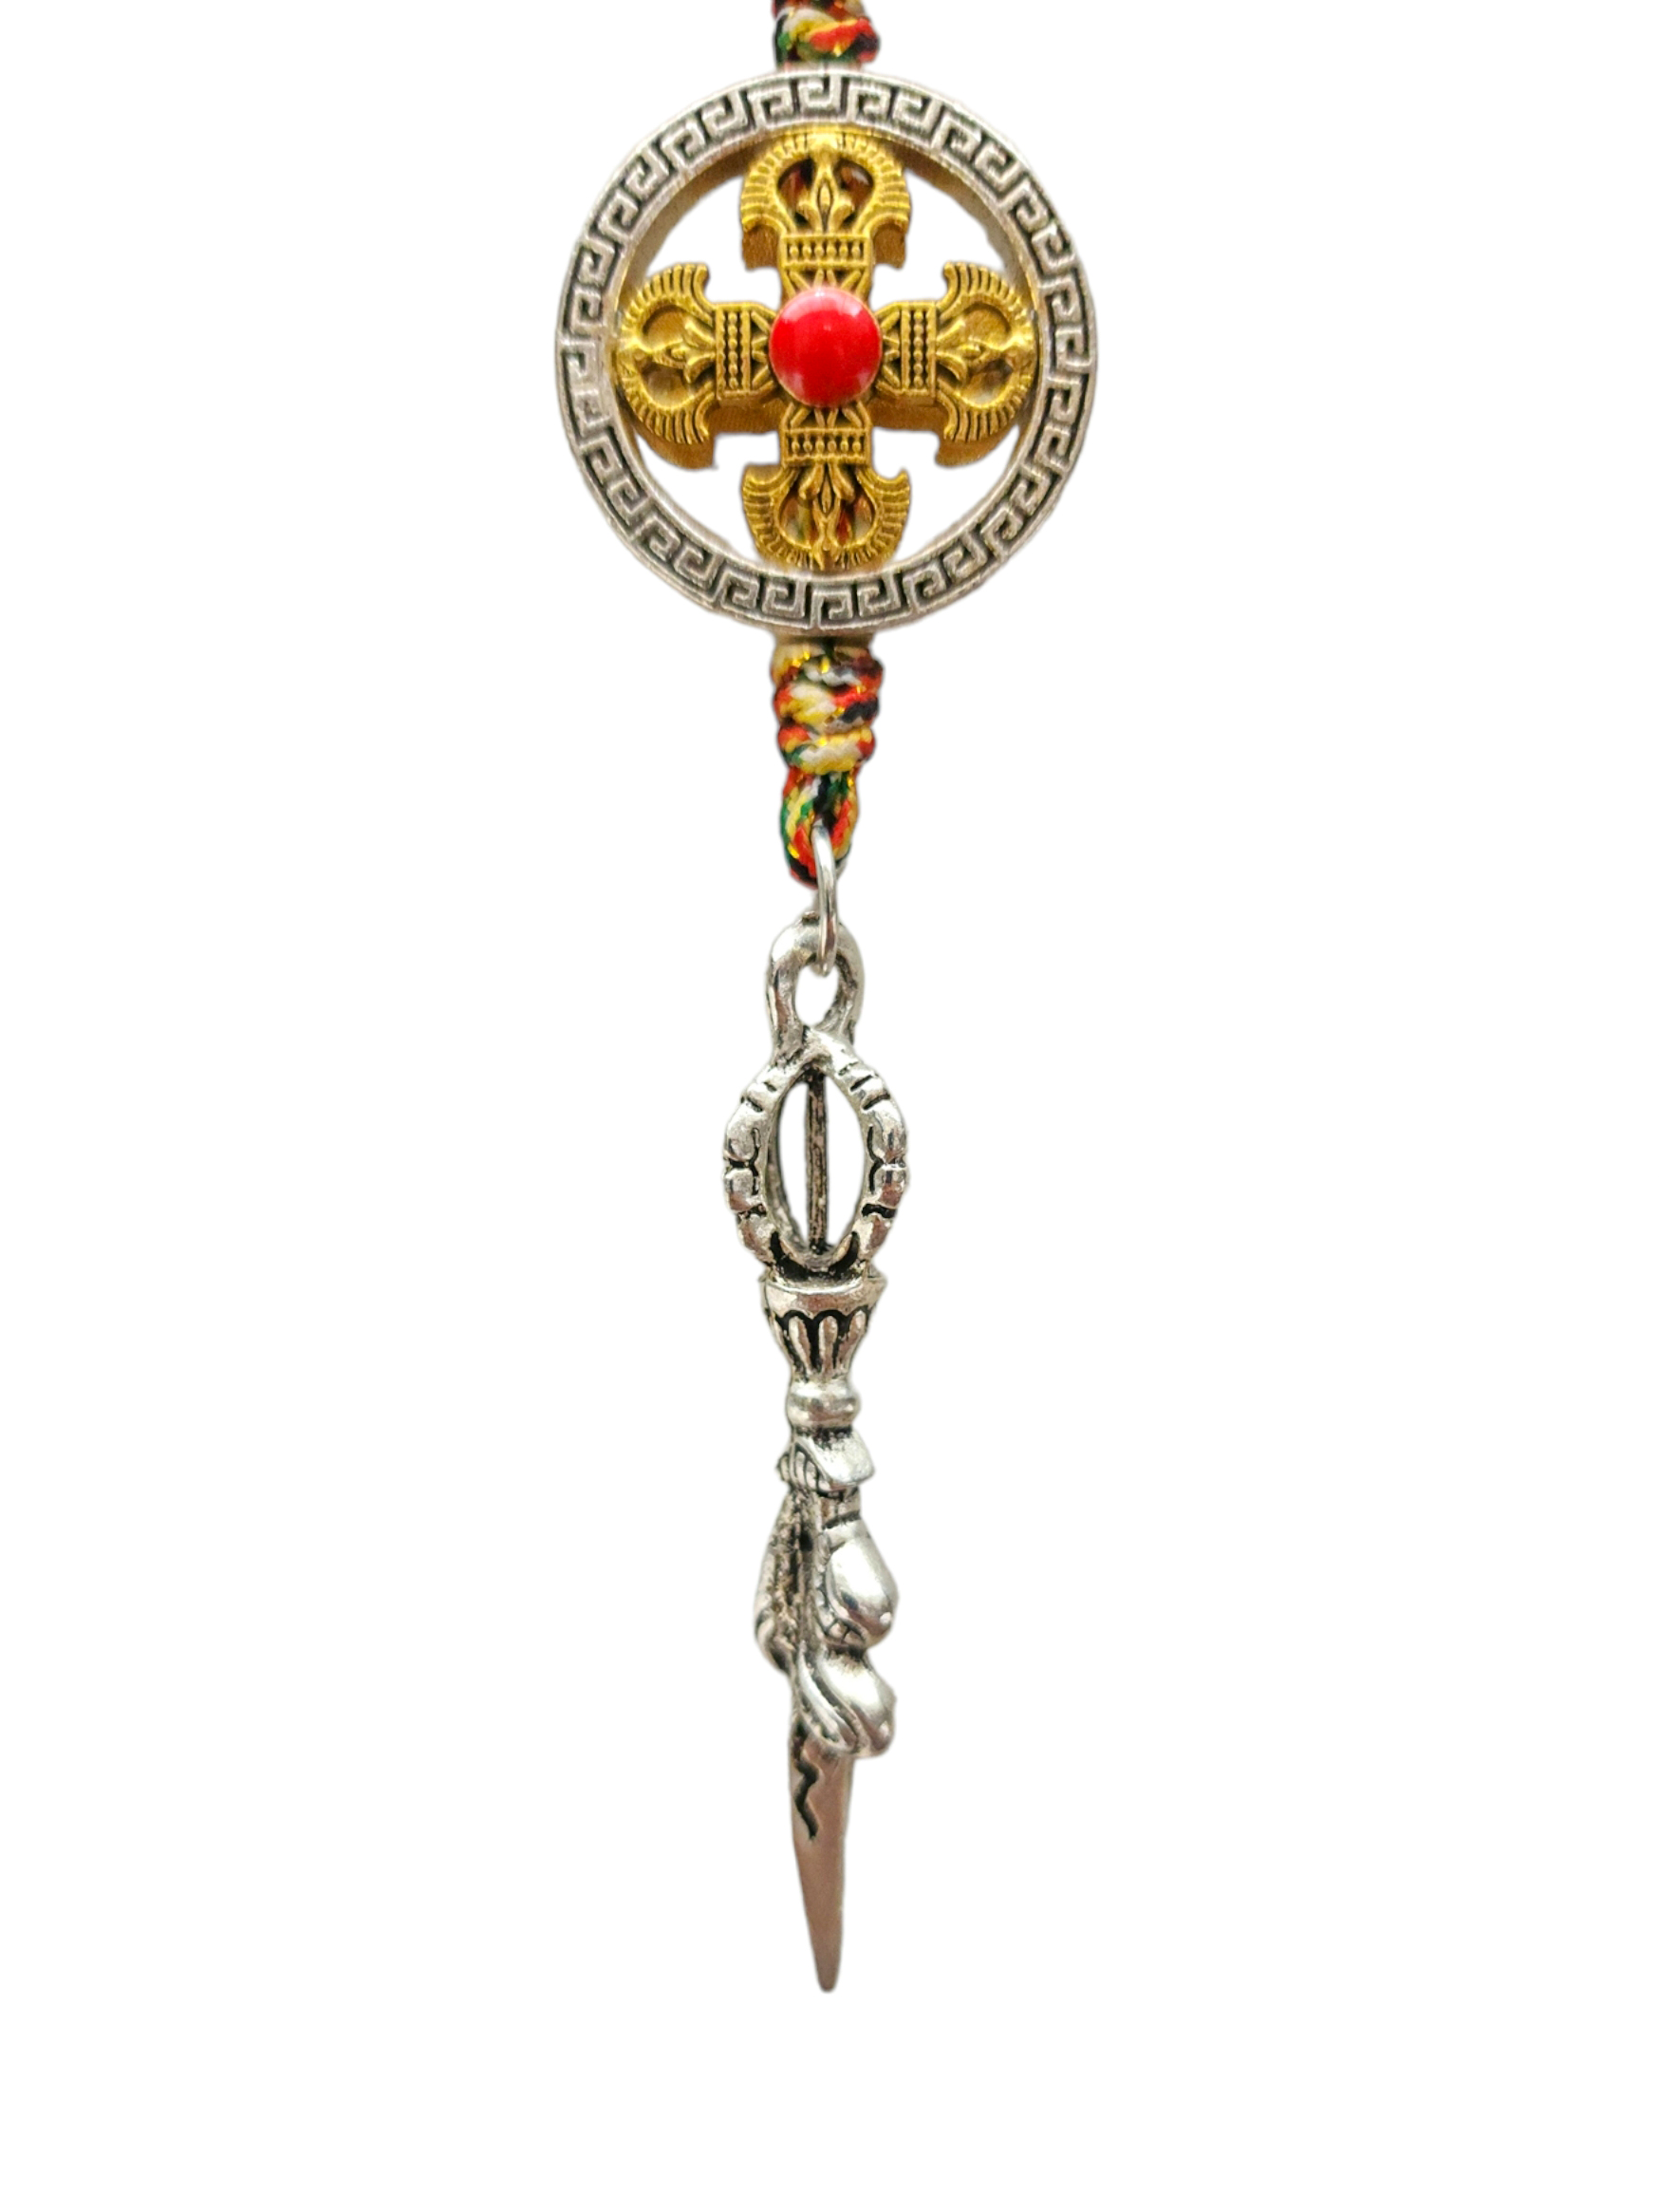 Buddhist Ritual Amulet Hanging With Double Dorje And Phurba, For Wall, Altar, Bags And Keyring